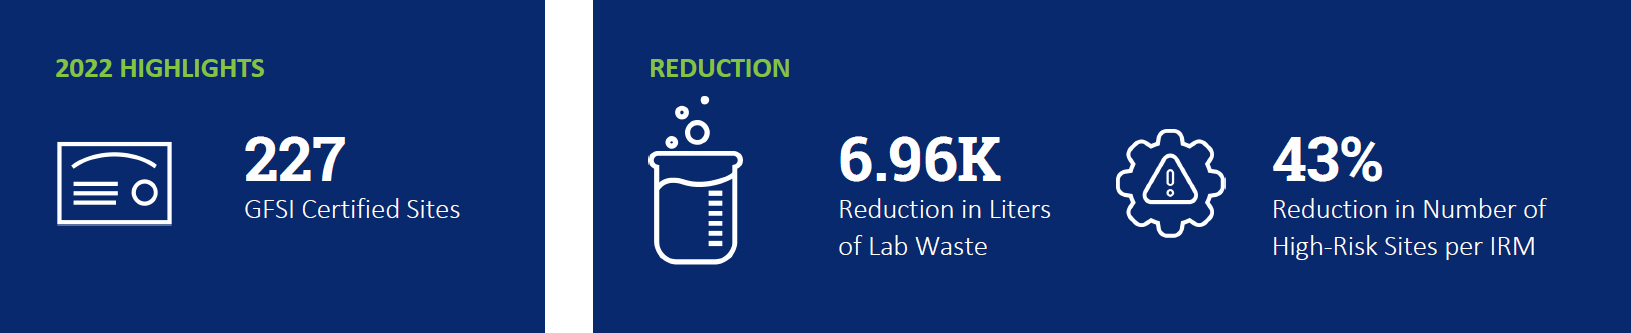 2022 Highlights - 227 GFSI Certified Sites - 6.96K Reduction in Liters of Lab Waste - 43% Reduction in Number of High-Risk Sites per IRM